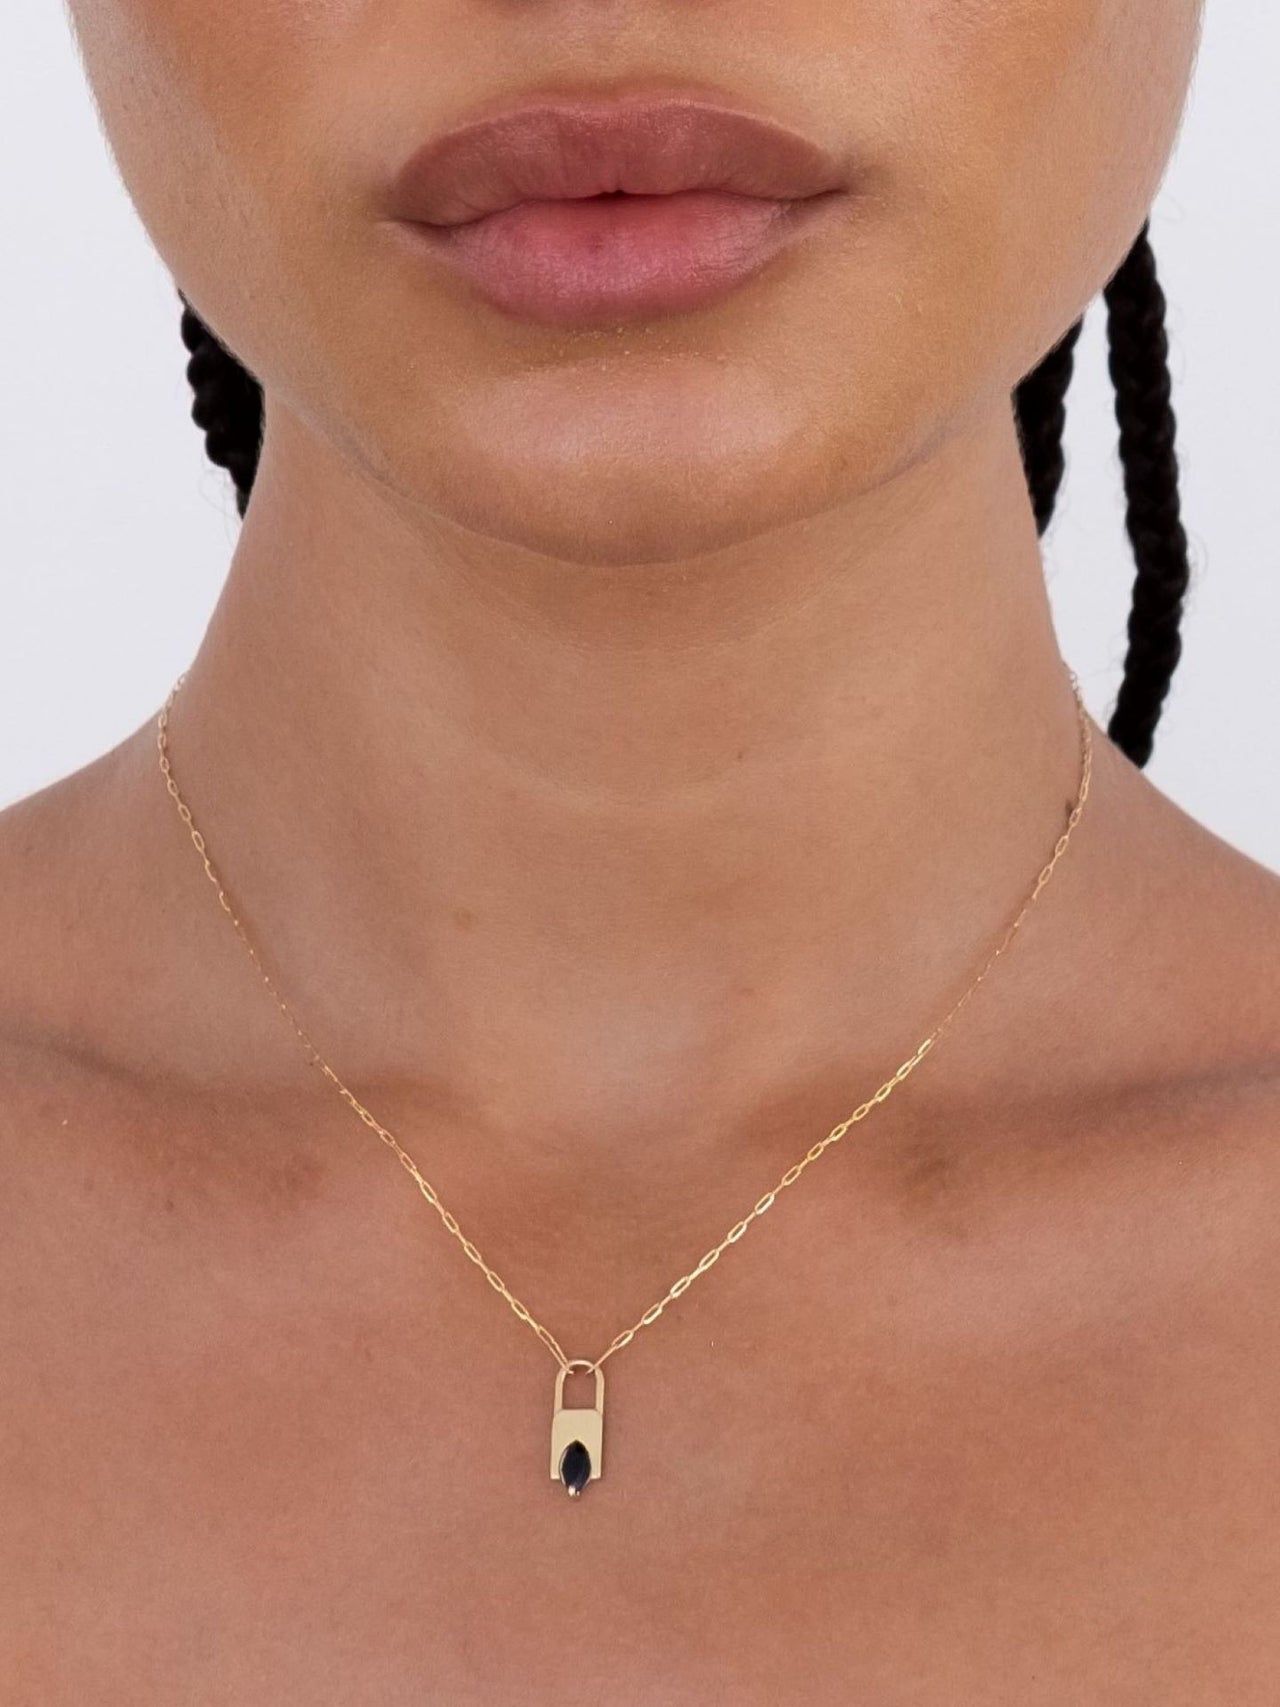 14kt Yellow Gold Luchetto Gem Charm Necklace pictured on model. 